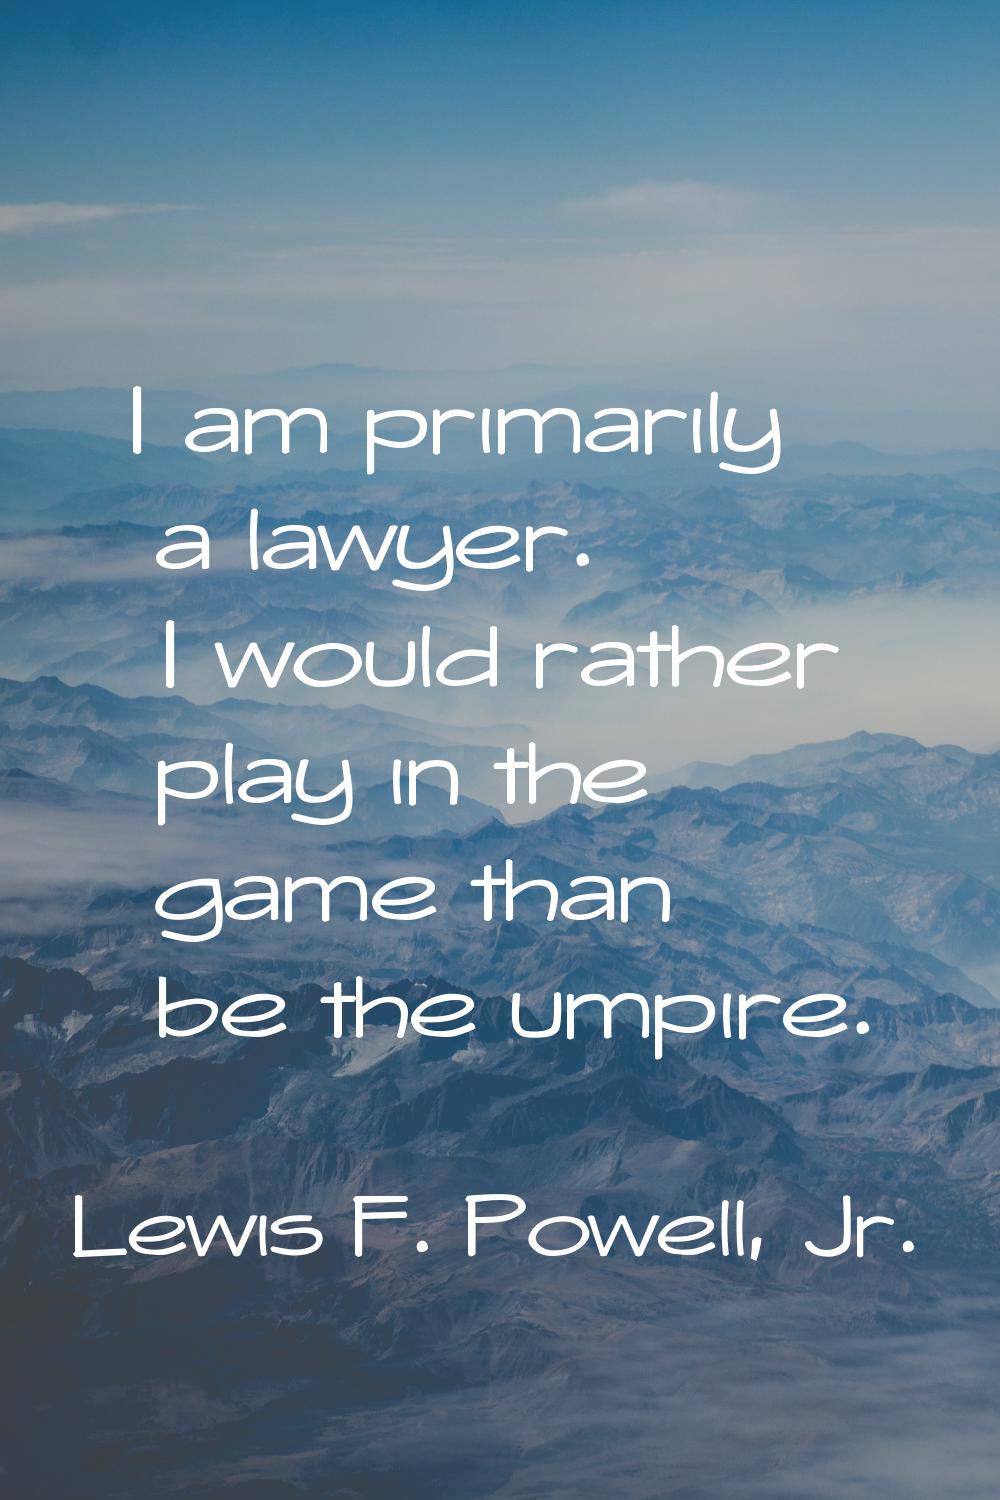 I am primarily a lawyer. I would rather play in the game than be the umpire.